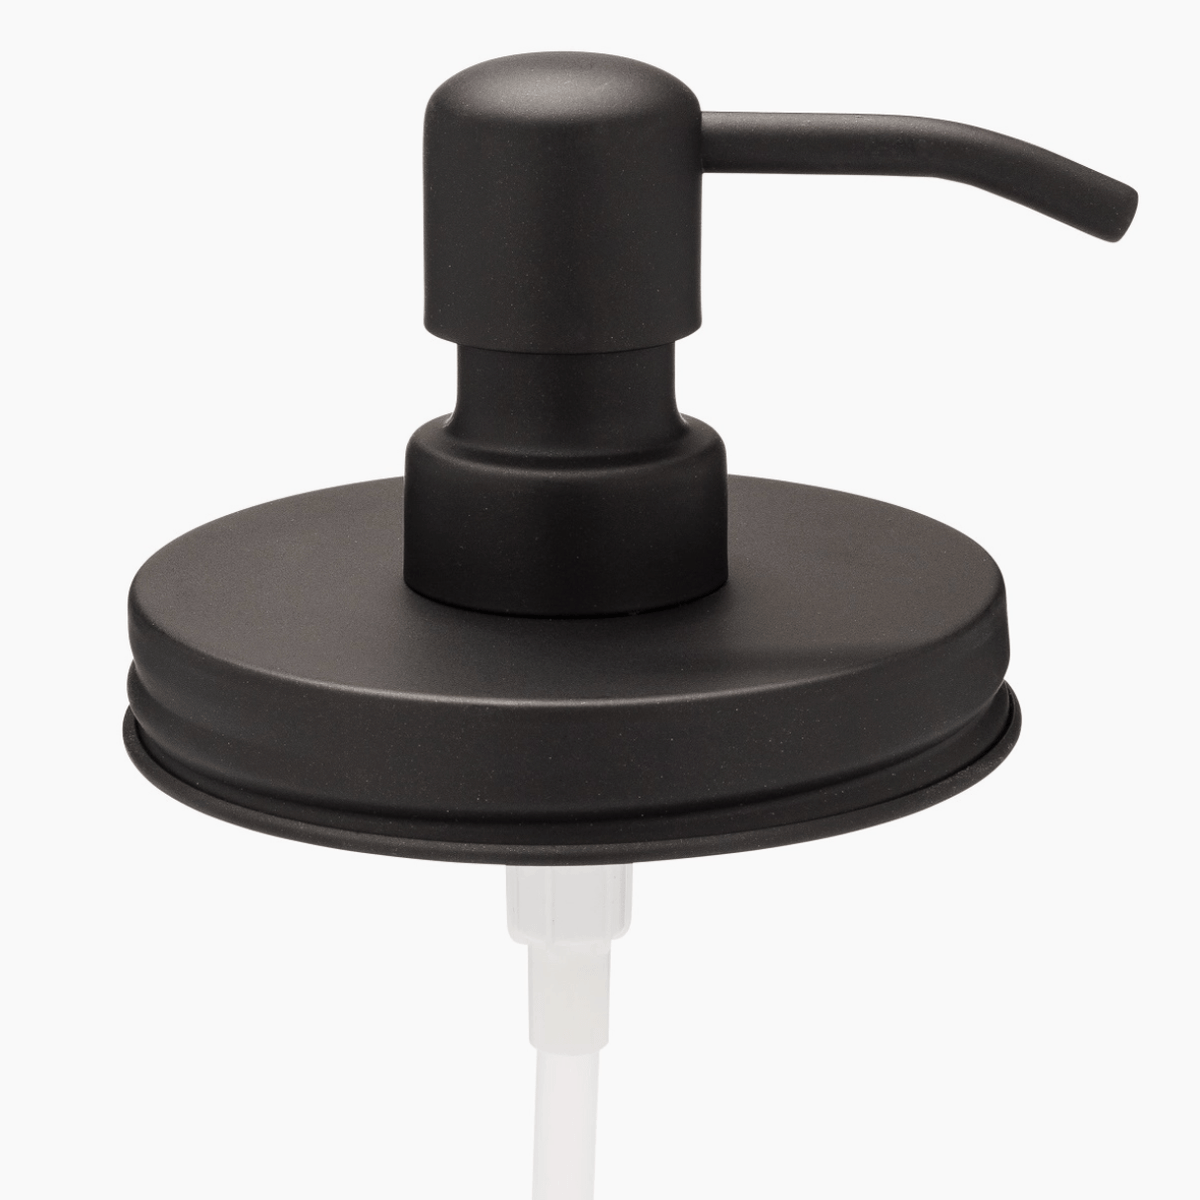 Photo of a black wide mouth soap dispenser.